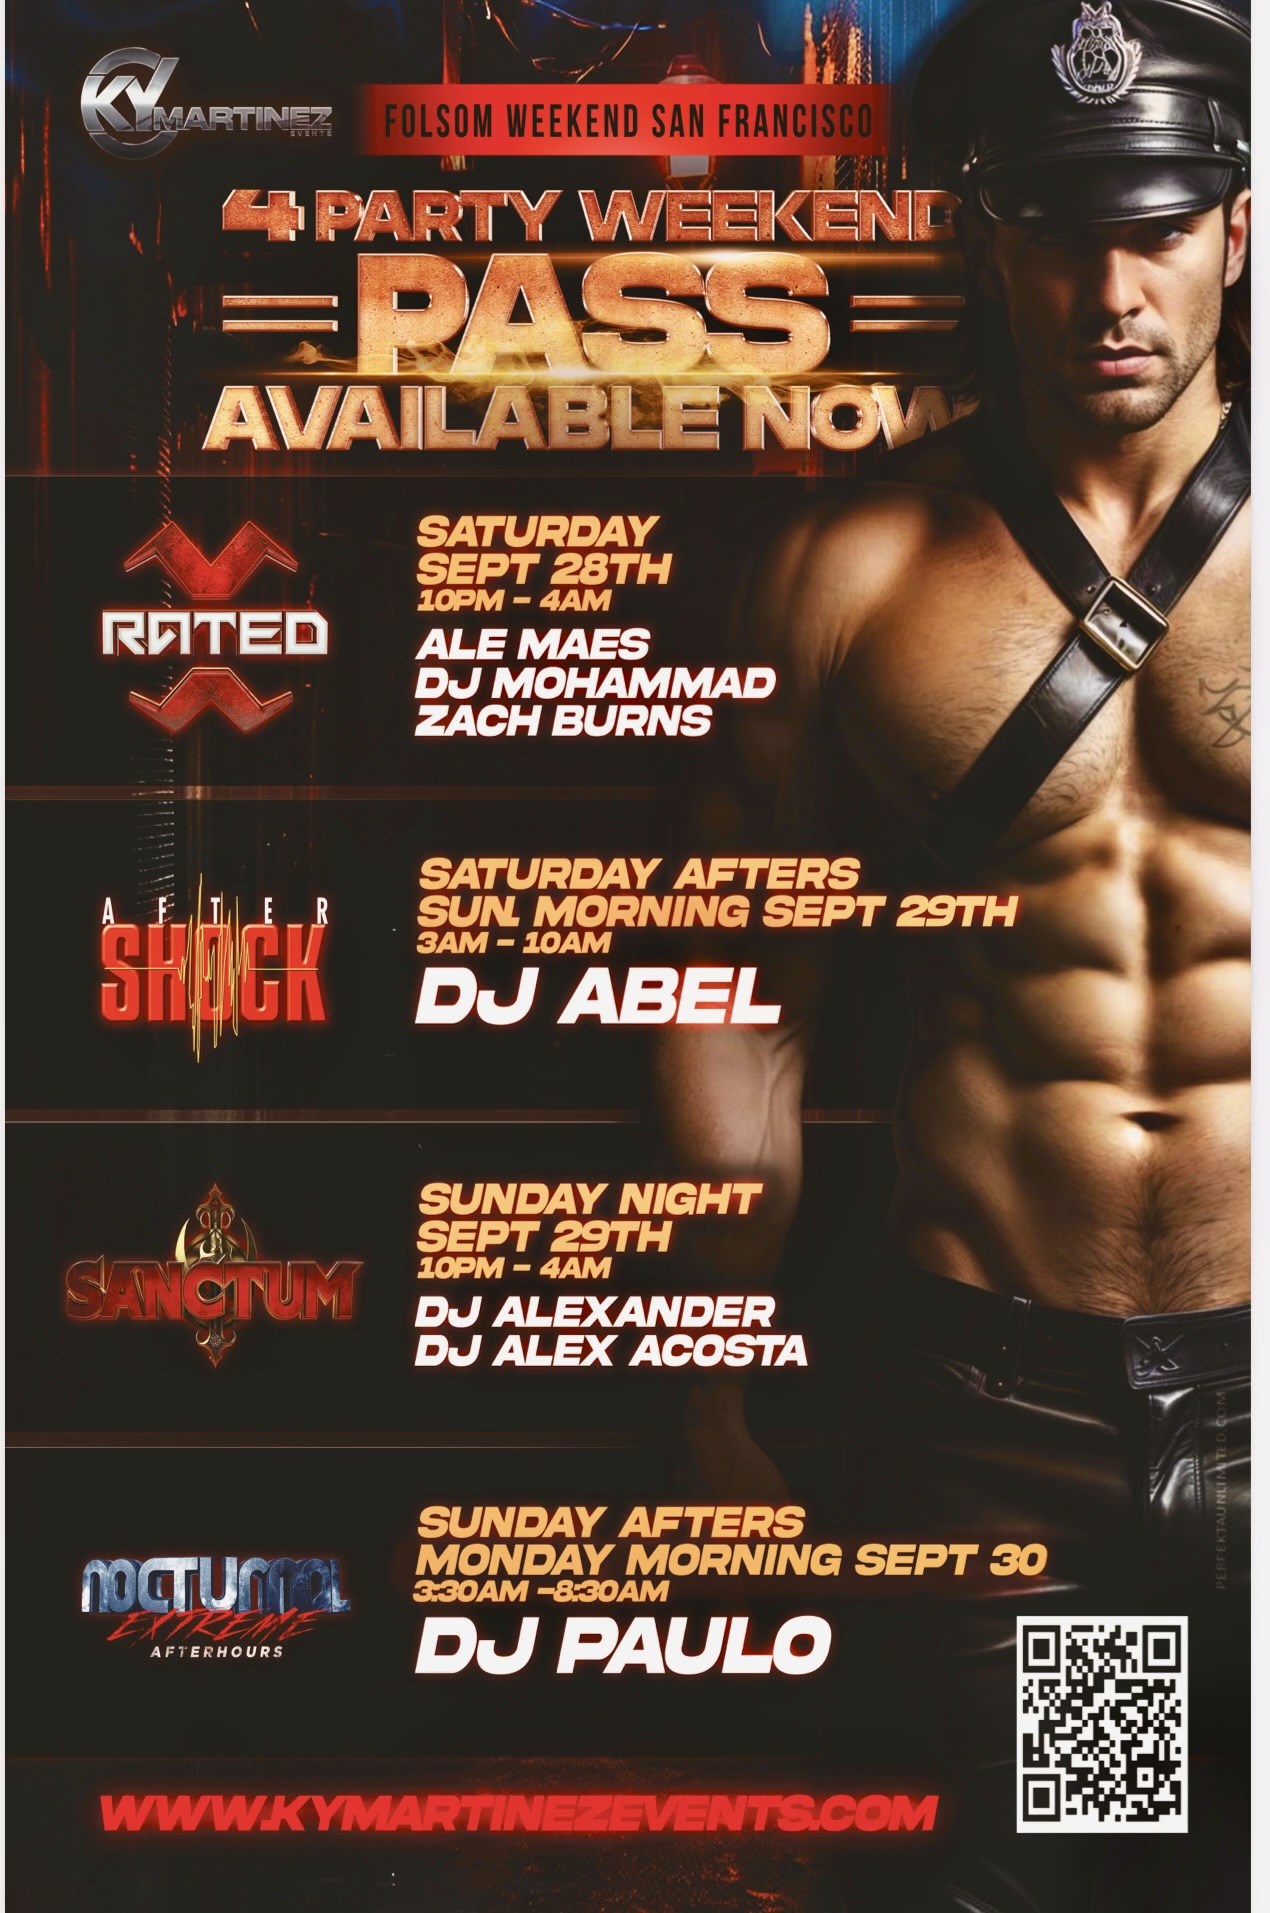 Buy Tickets to Folsom weekend 4 party pass AFTERSHOCK, in San Francisco